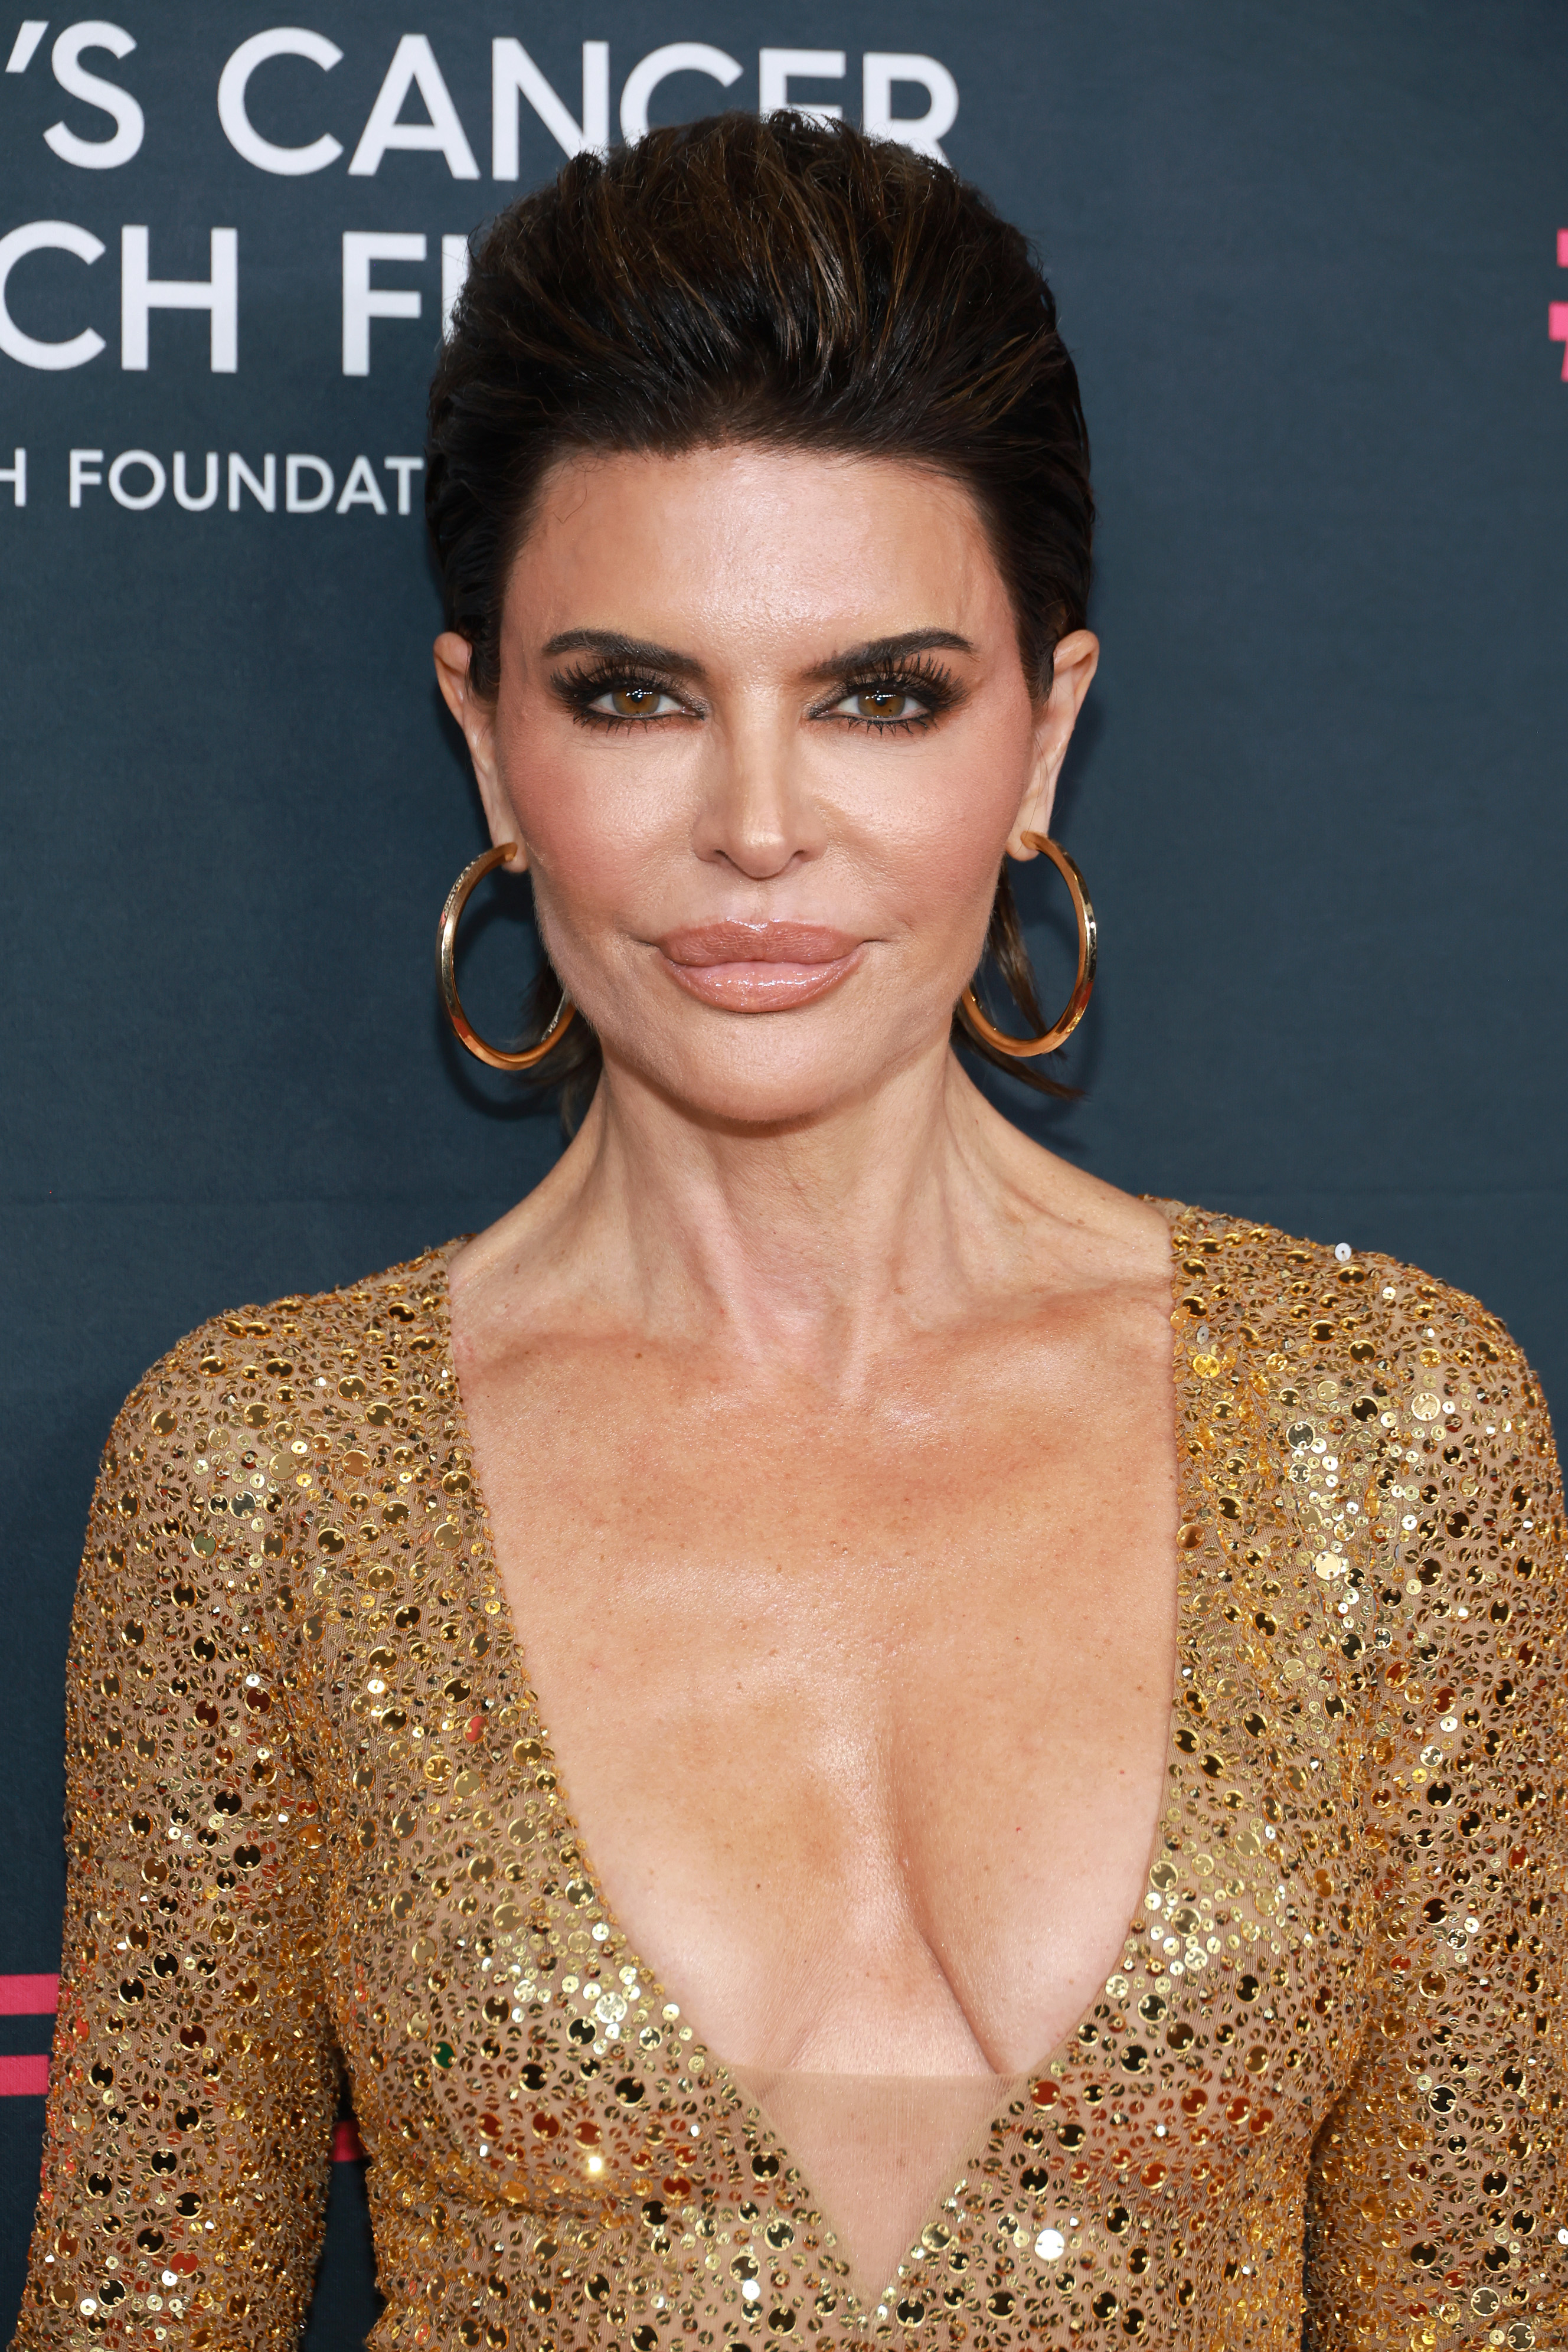 Lisa Rinna wearing a sequined dress with plunging neckline at an event